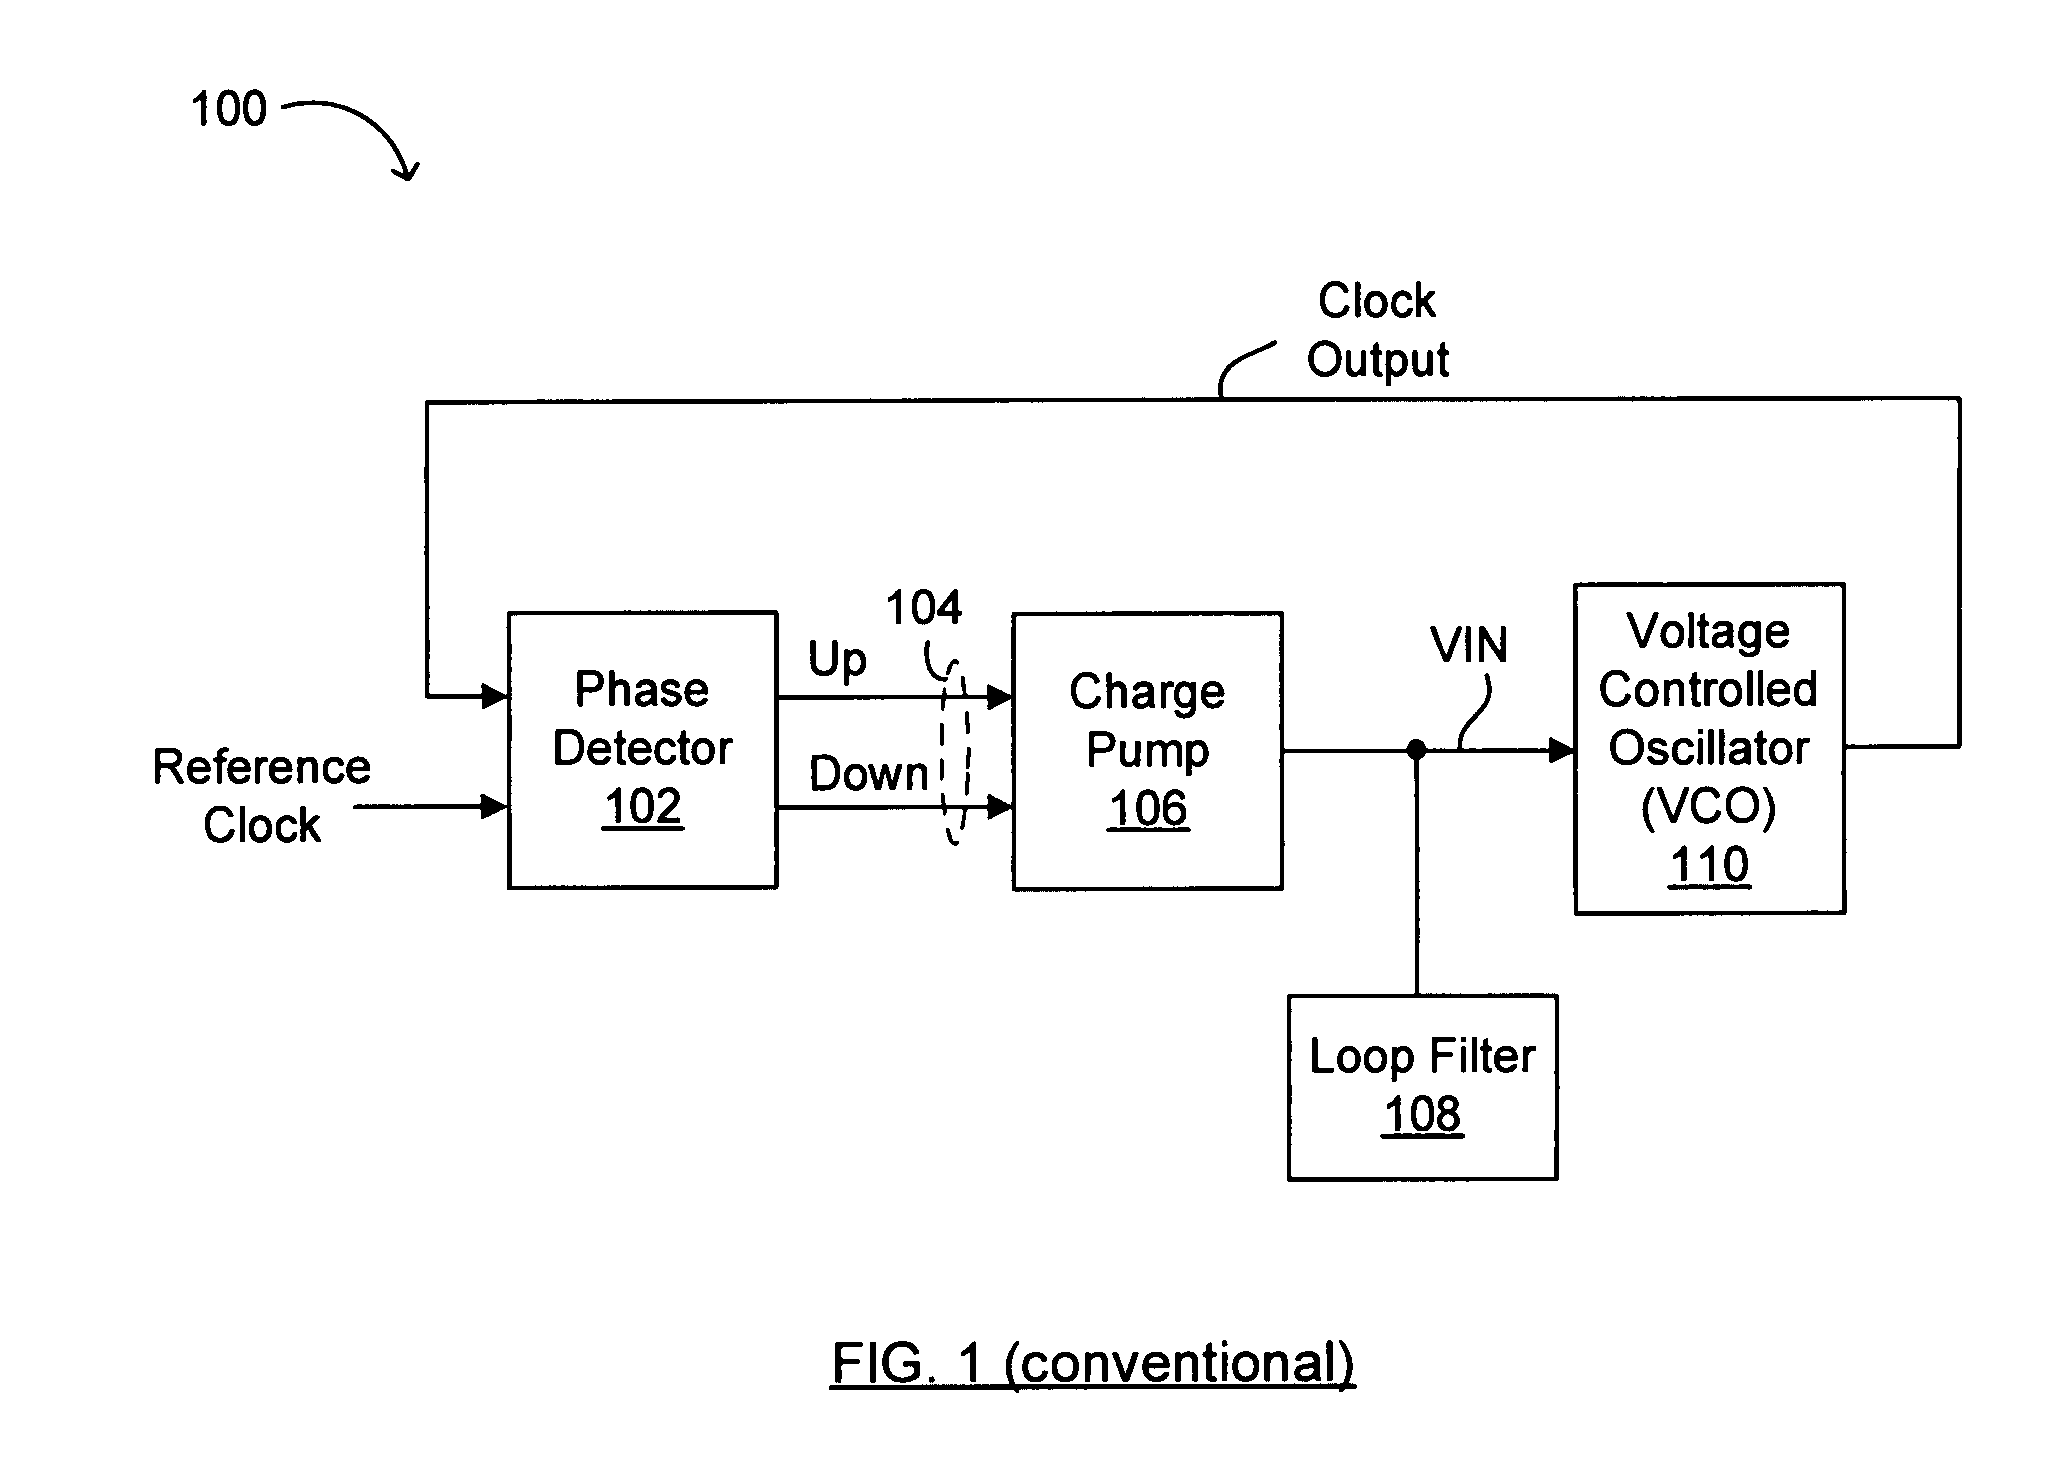 Adjustable supply voltage in a voltage controlled oscillator (VCO) for wide range frequency coverage